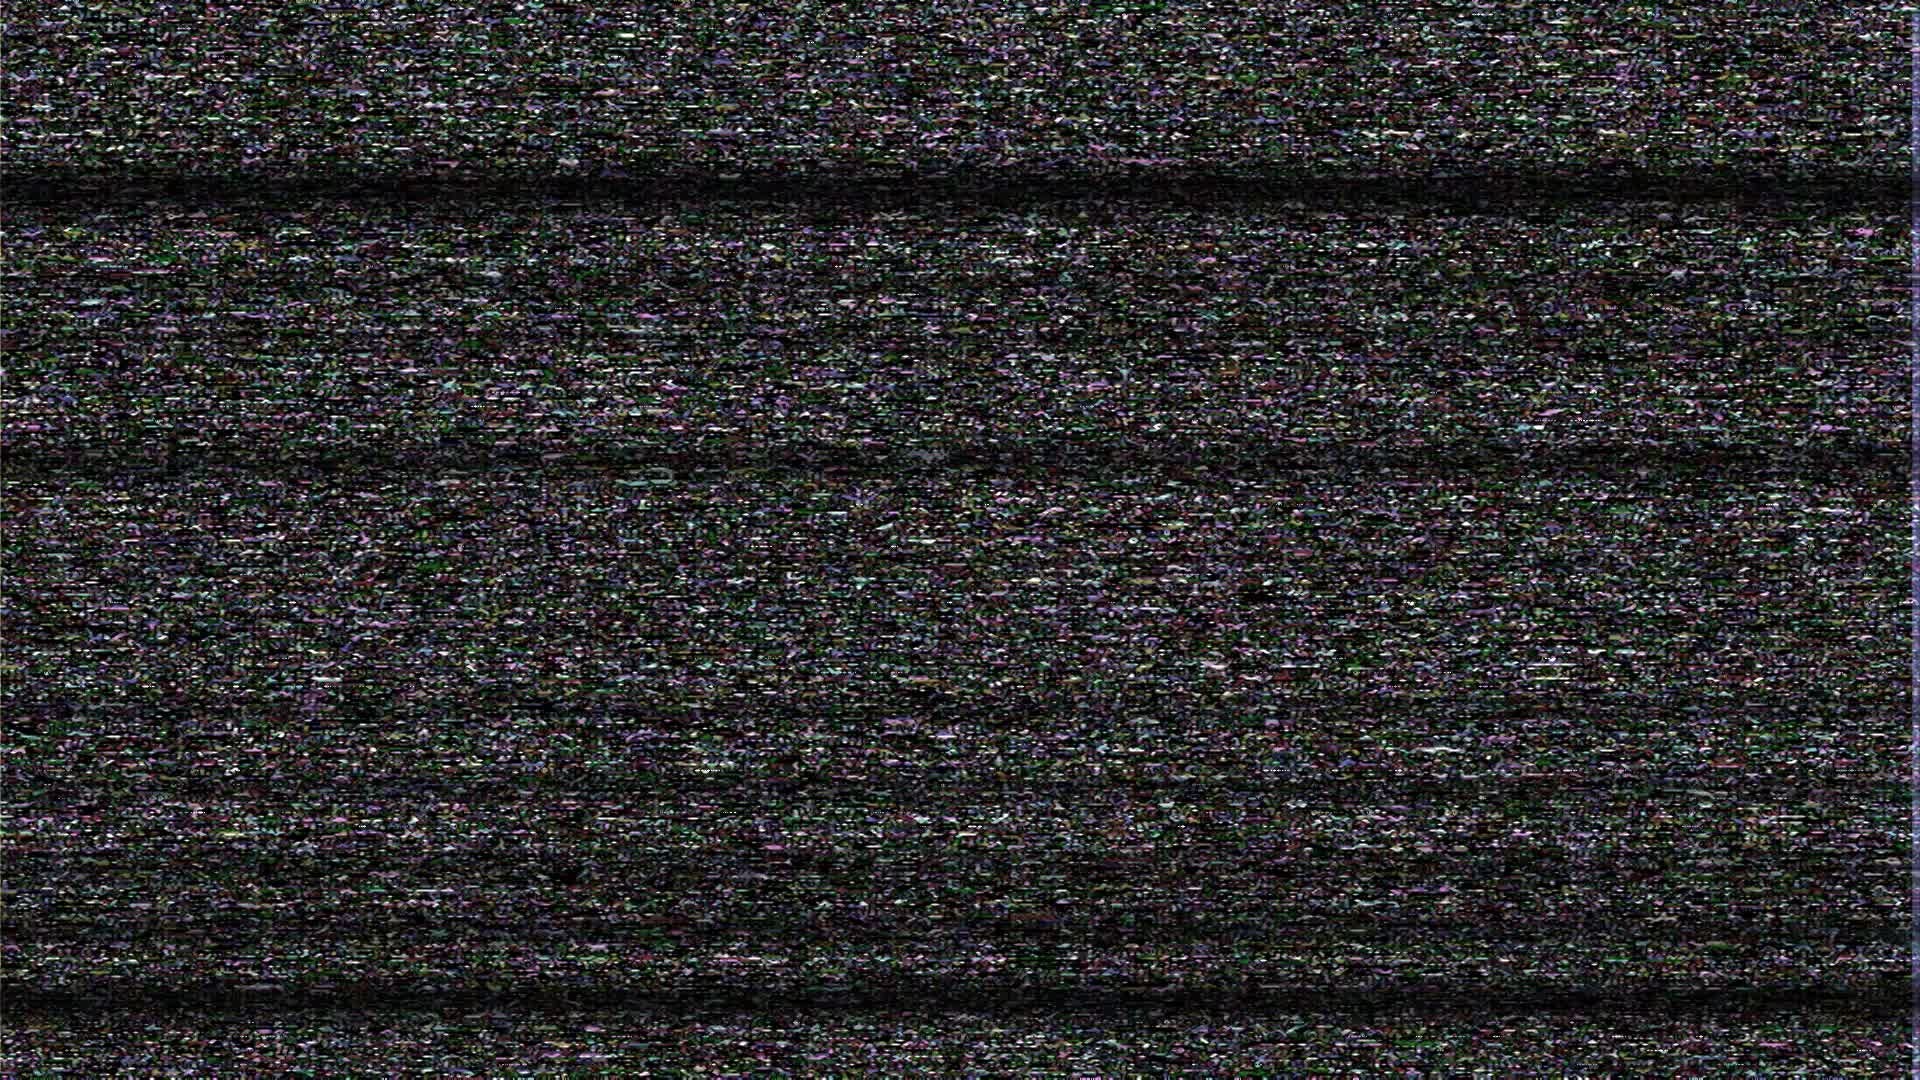 Tv static android wallpaper